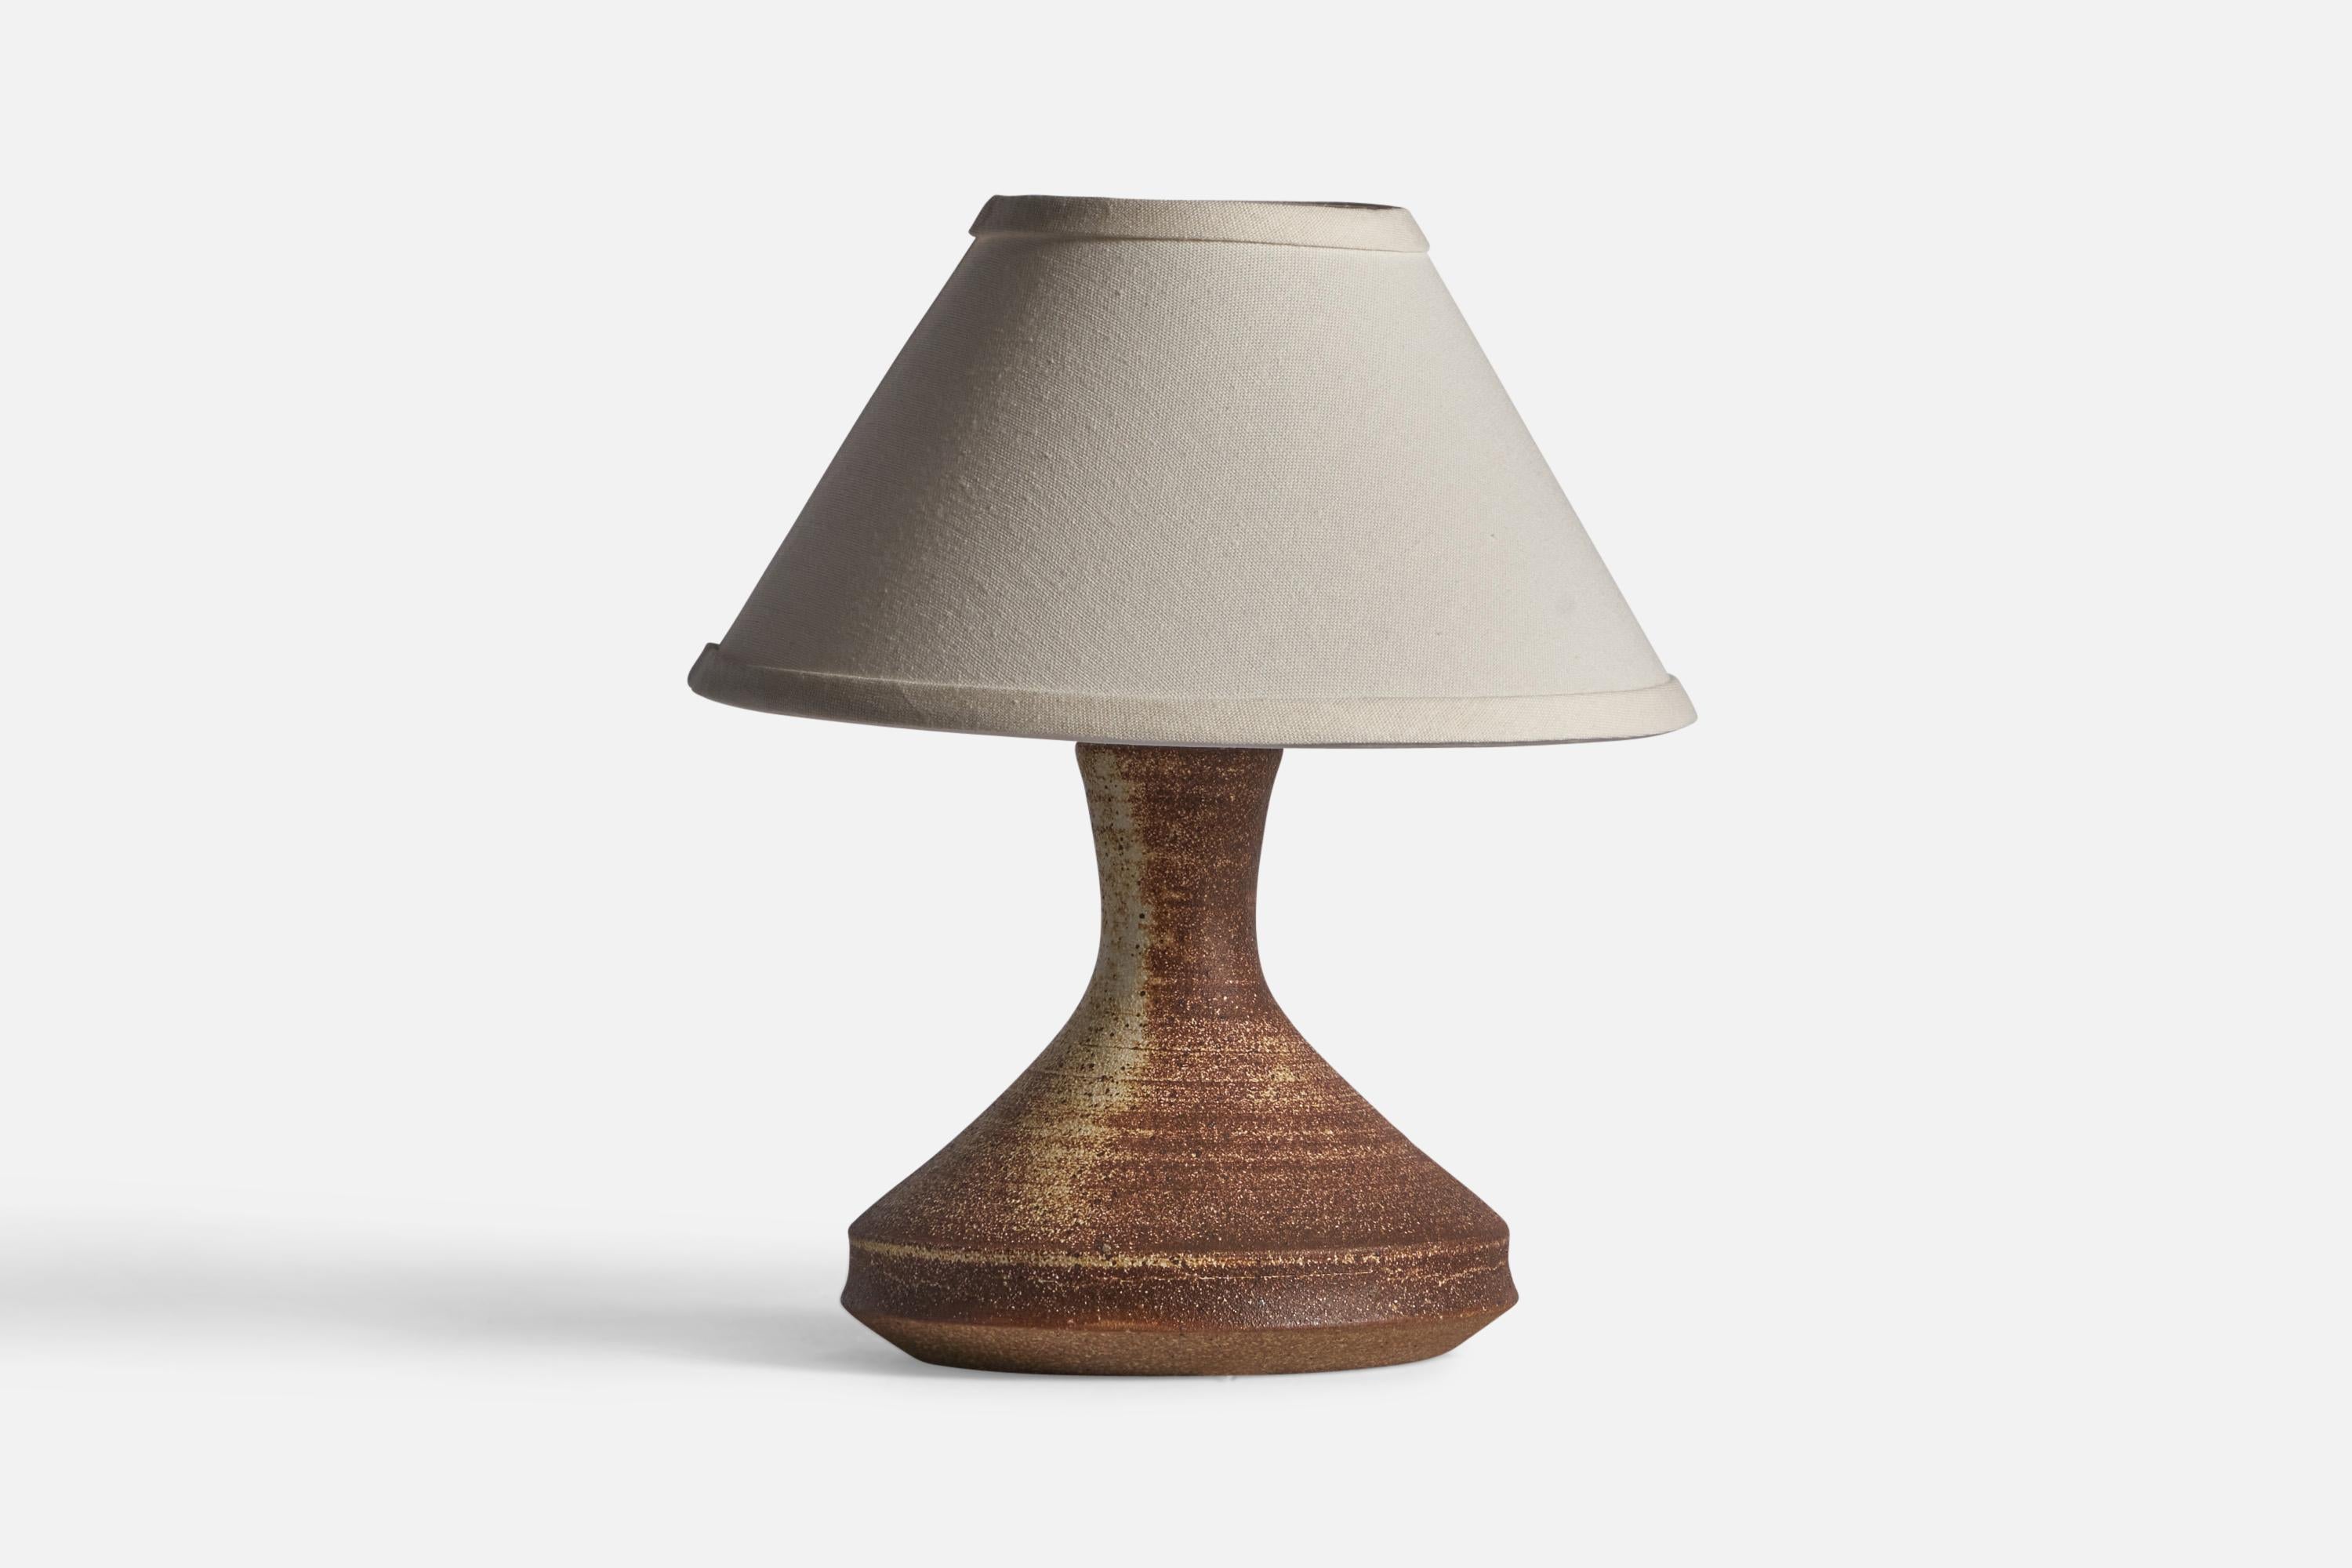 A brown and beige stoneware table lamp, designed and produced in Denmark, c. 1960s.

Dimensions of Lamp (inches): 9.5